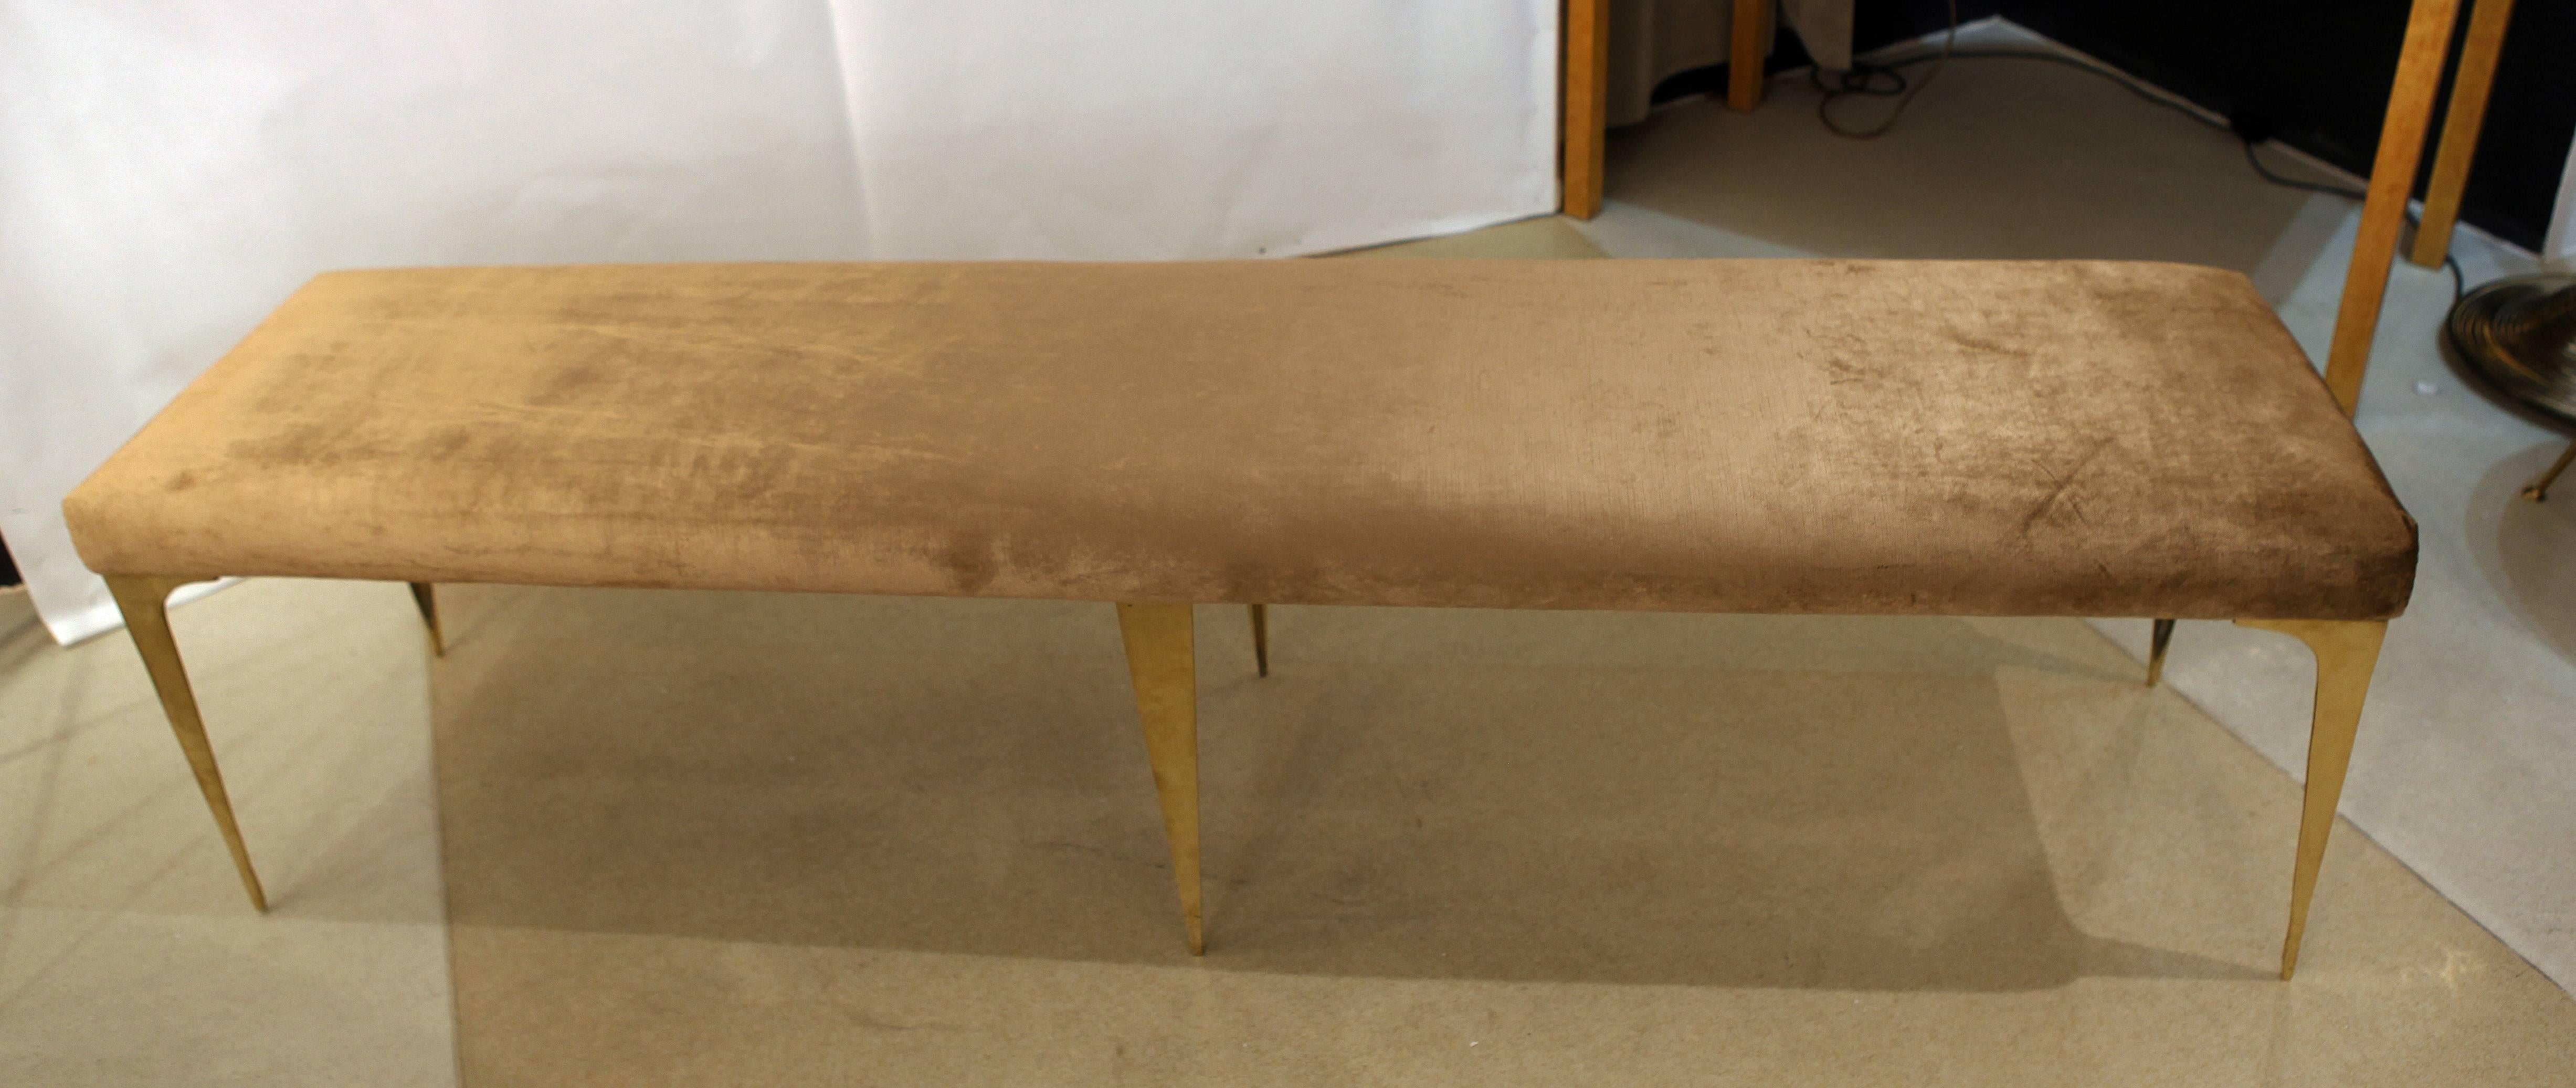 A pair of super glamorous long Italian designed benches reupholstered in gold velvet with stiletto bronze legs Hollywood Regency style Fantastic proportions great with a dining table or in a lobby area.